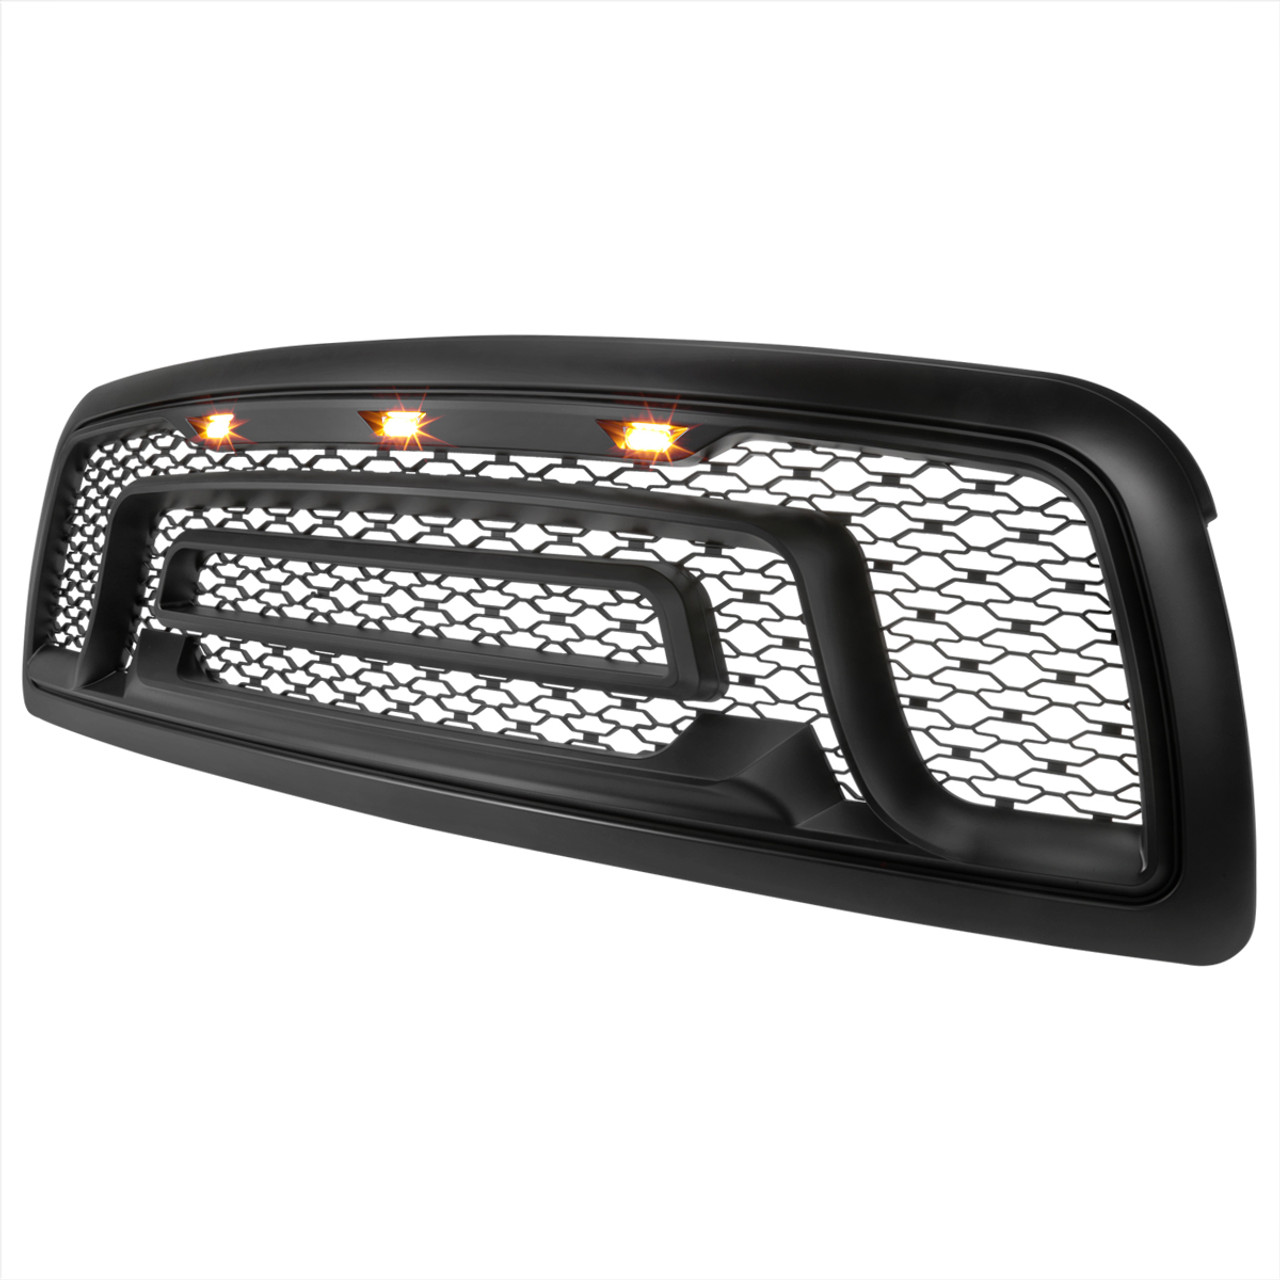 2009-2012 Dodge RAM 1500 Rebel Style Front hood Grille w/ Amber